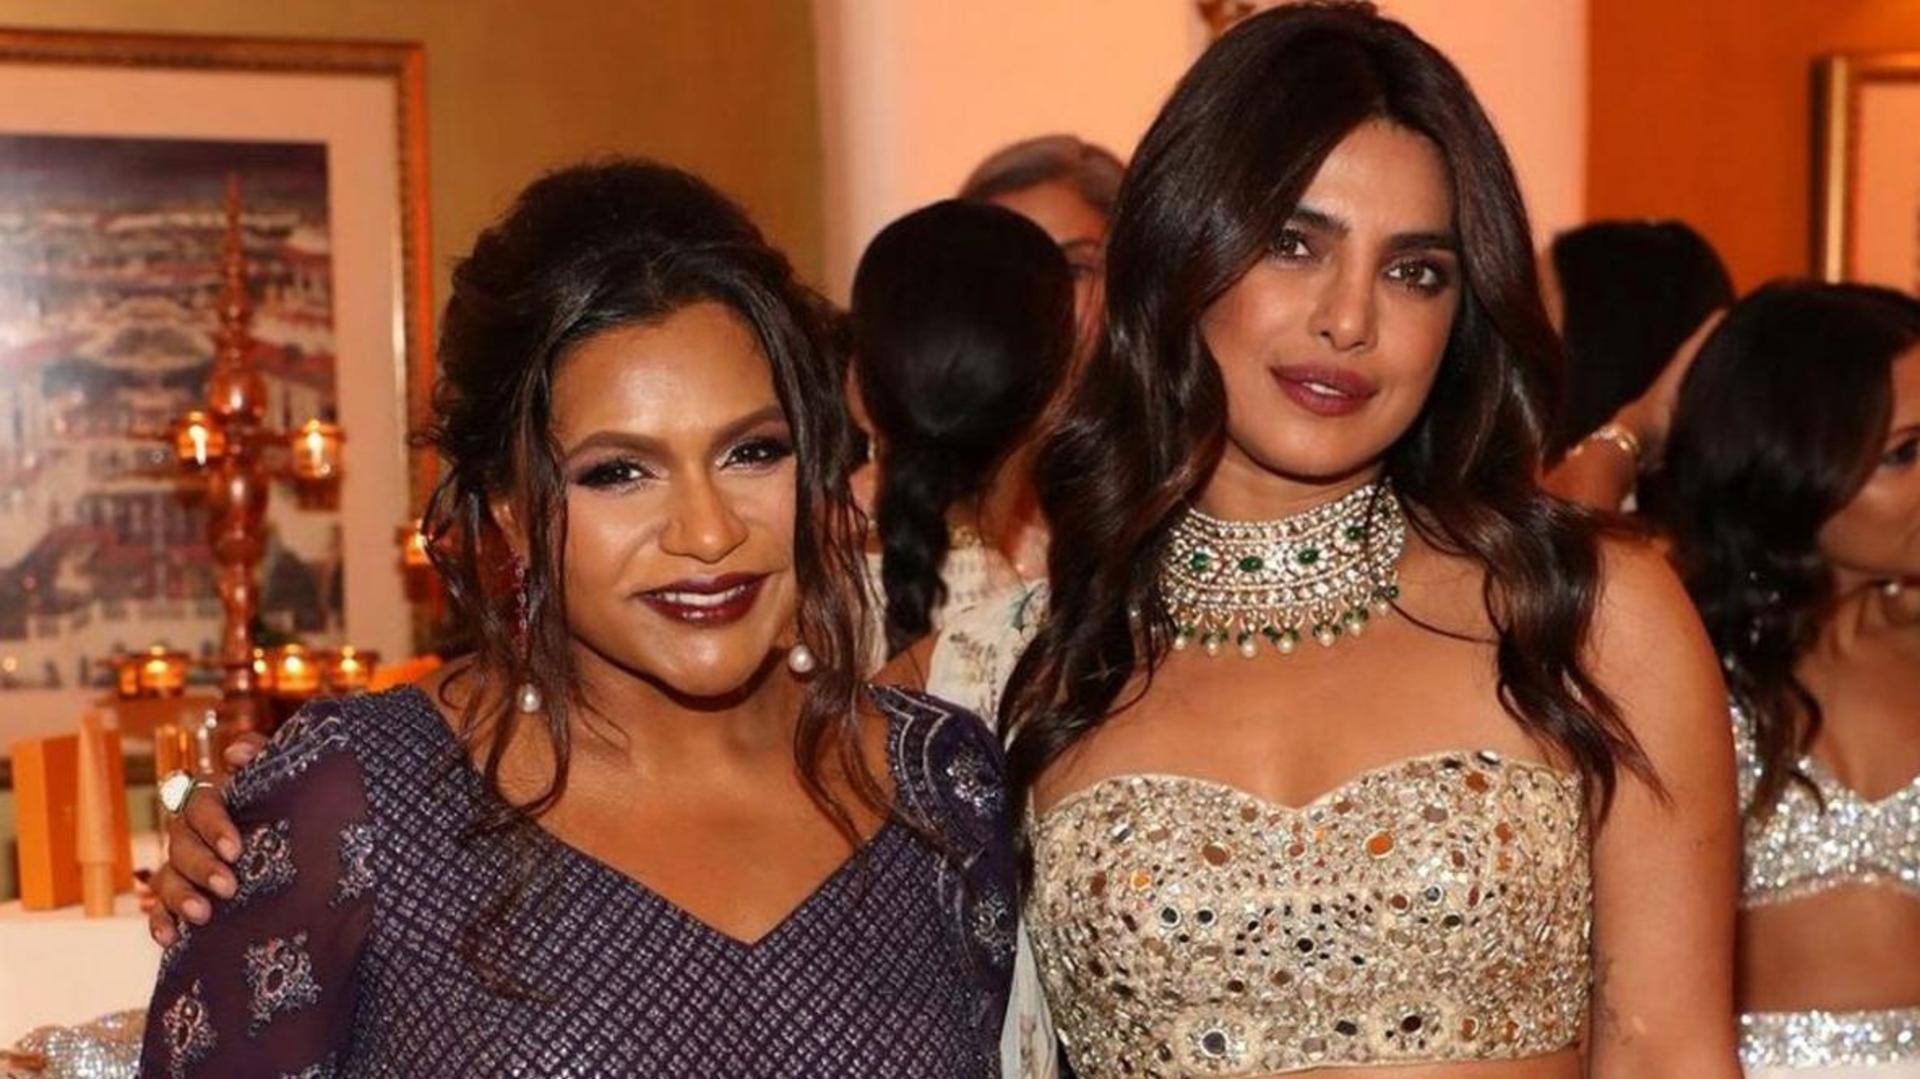 Mindy Kaling scouting for upcoming Priyanka Chopra rom-com? Fans speculate